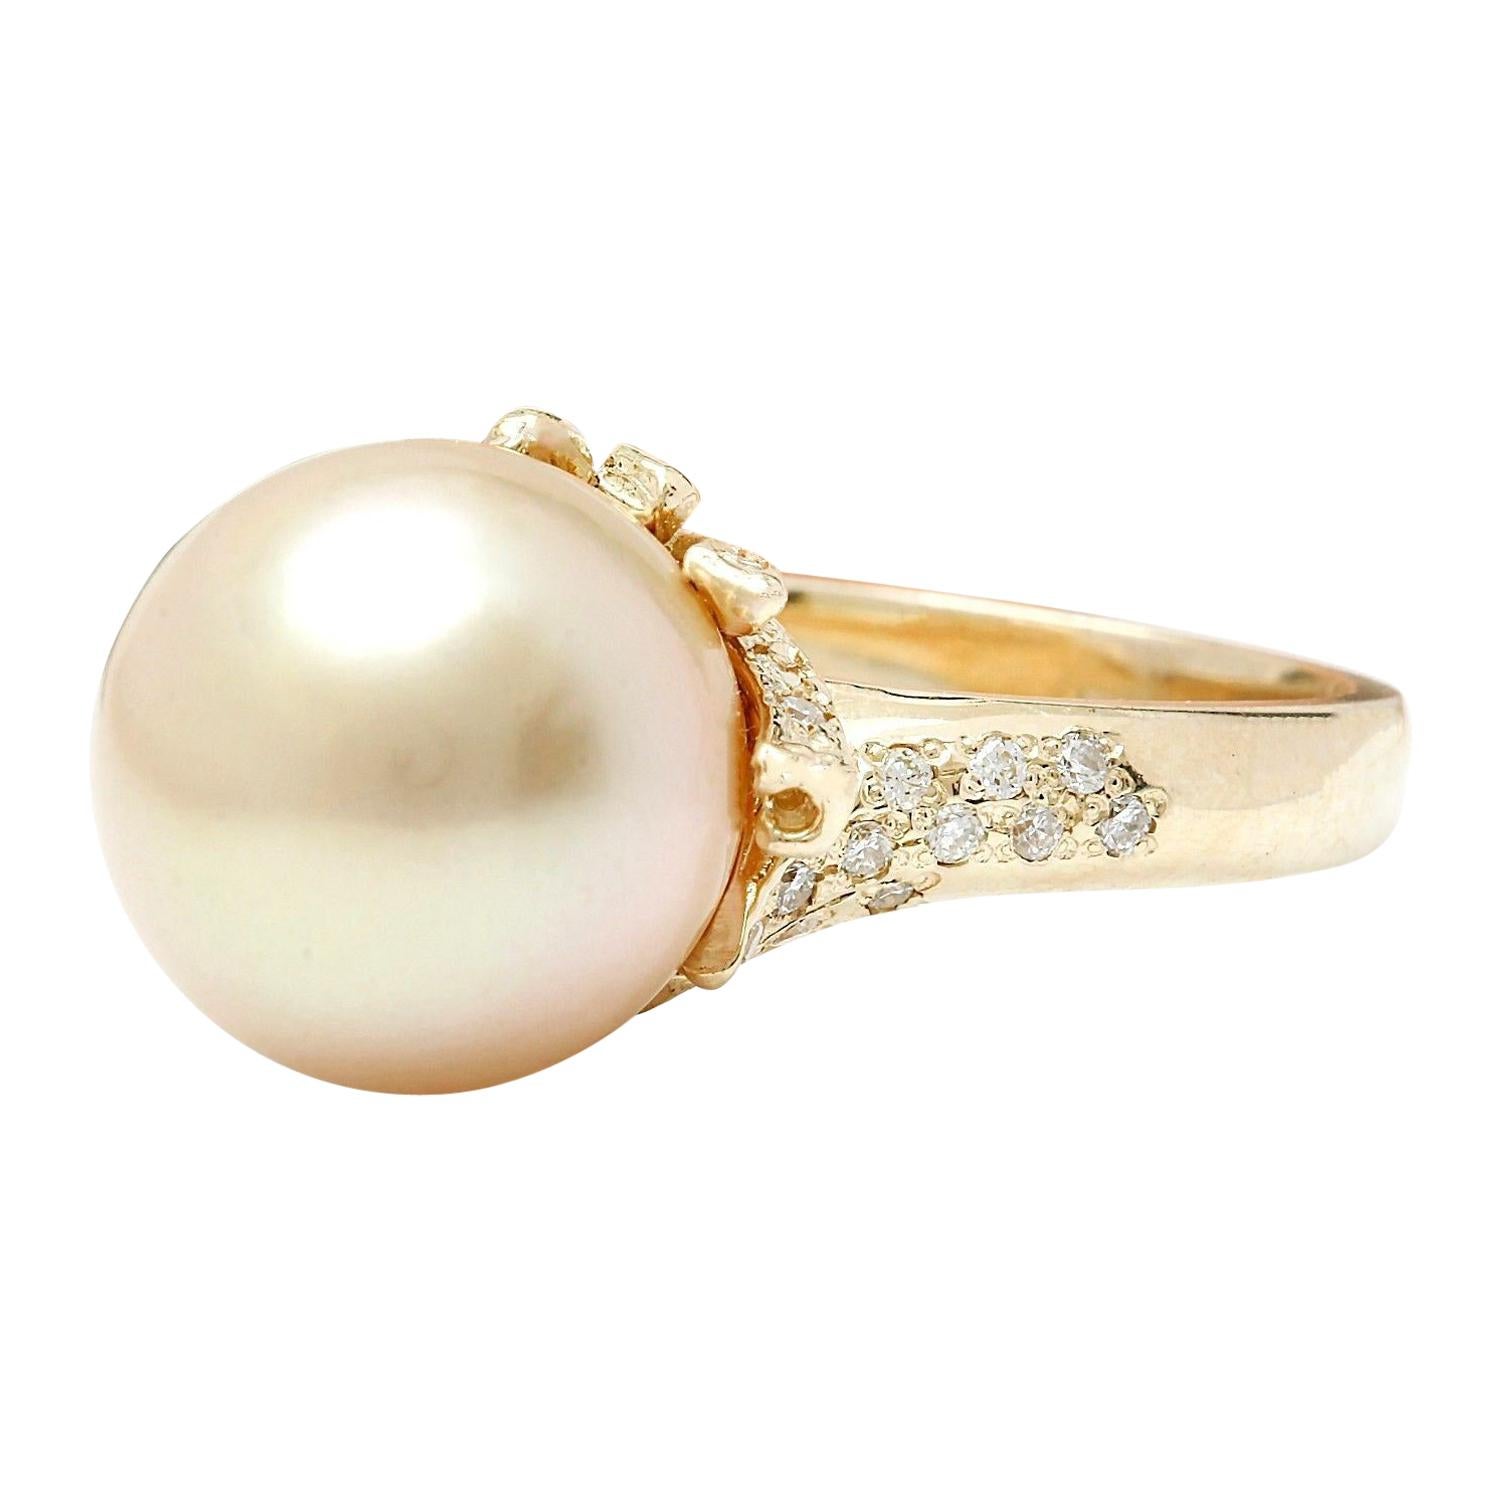 12.45 mm White South Sea Pearl 14K Solid Yellow Gold Diamond Ring
 Item Type: Ring
 Item Style: Cocktail
 Material: 14K Yellow Gold
 Mainstone: South Sea Pearl
 Stone Color: White
 Stone Shape: Round
 Stone Quantity: 1
 Stone Dimensions: 12.45x12.45